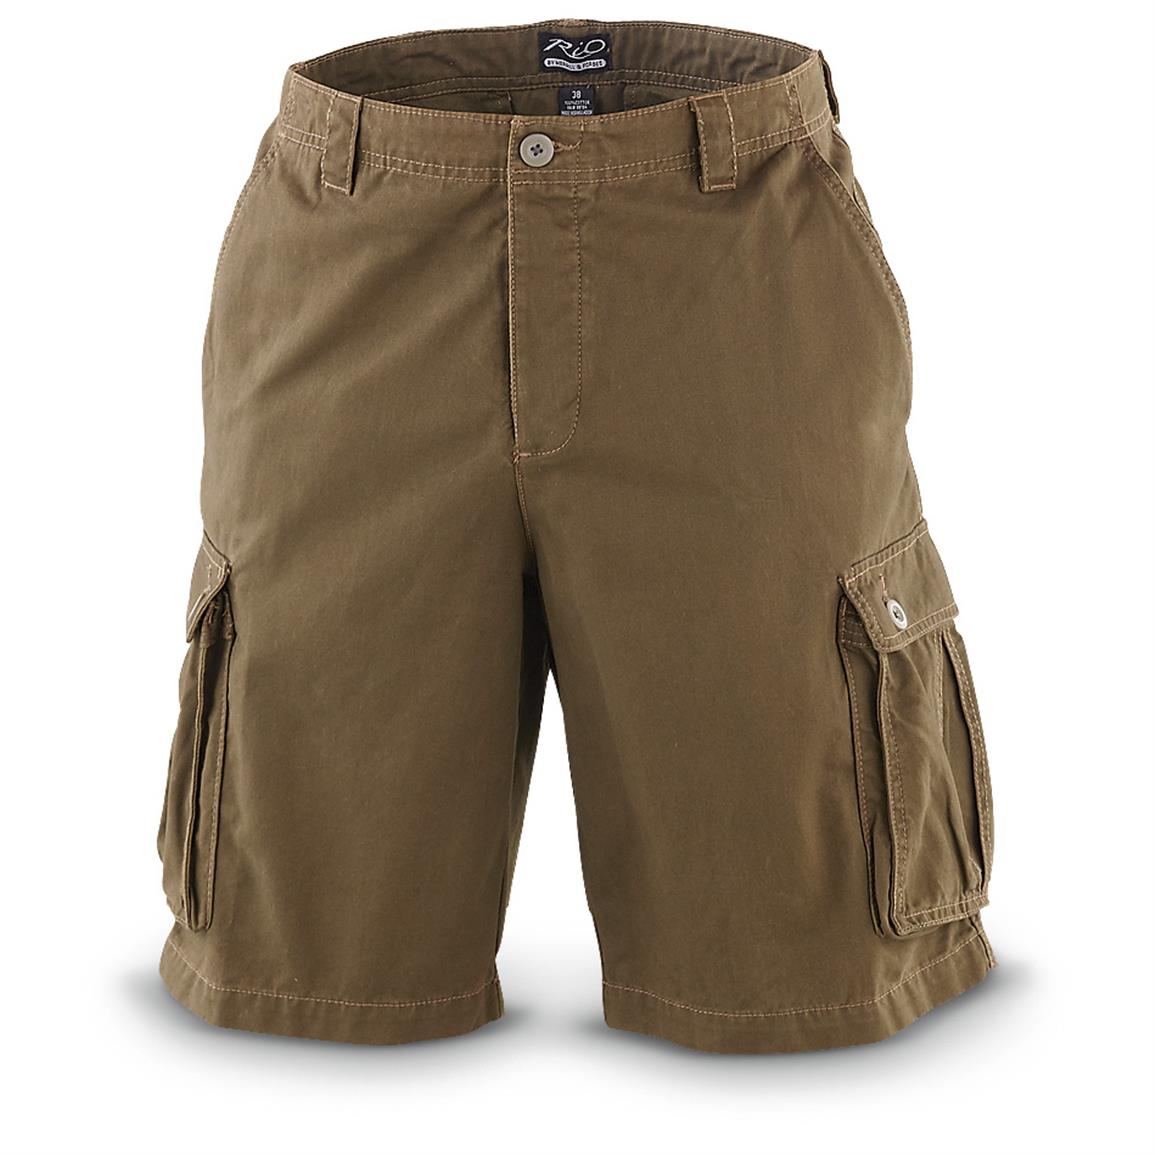 Rio Cotton Cargo Shorts - 609054, Shorts at Sportsman's Guide